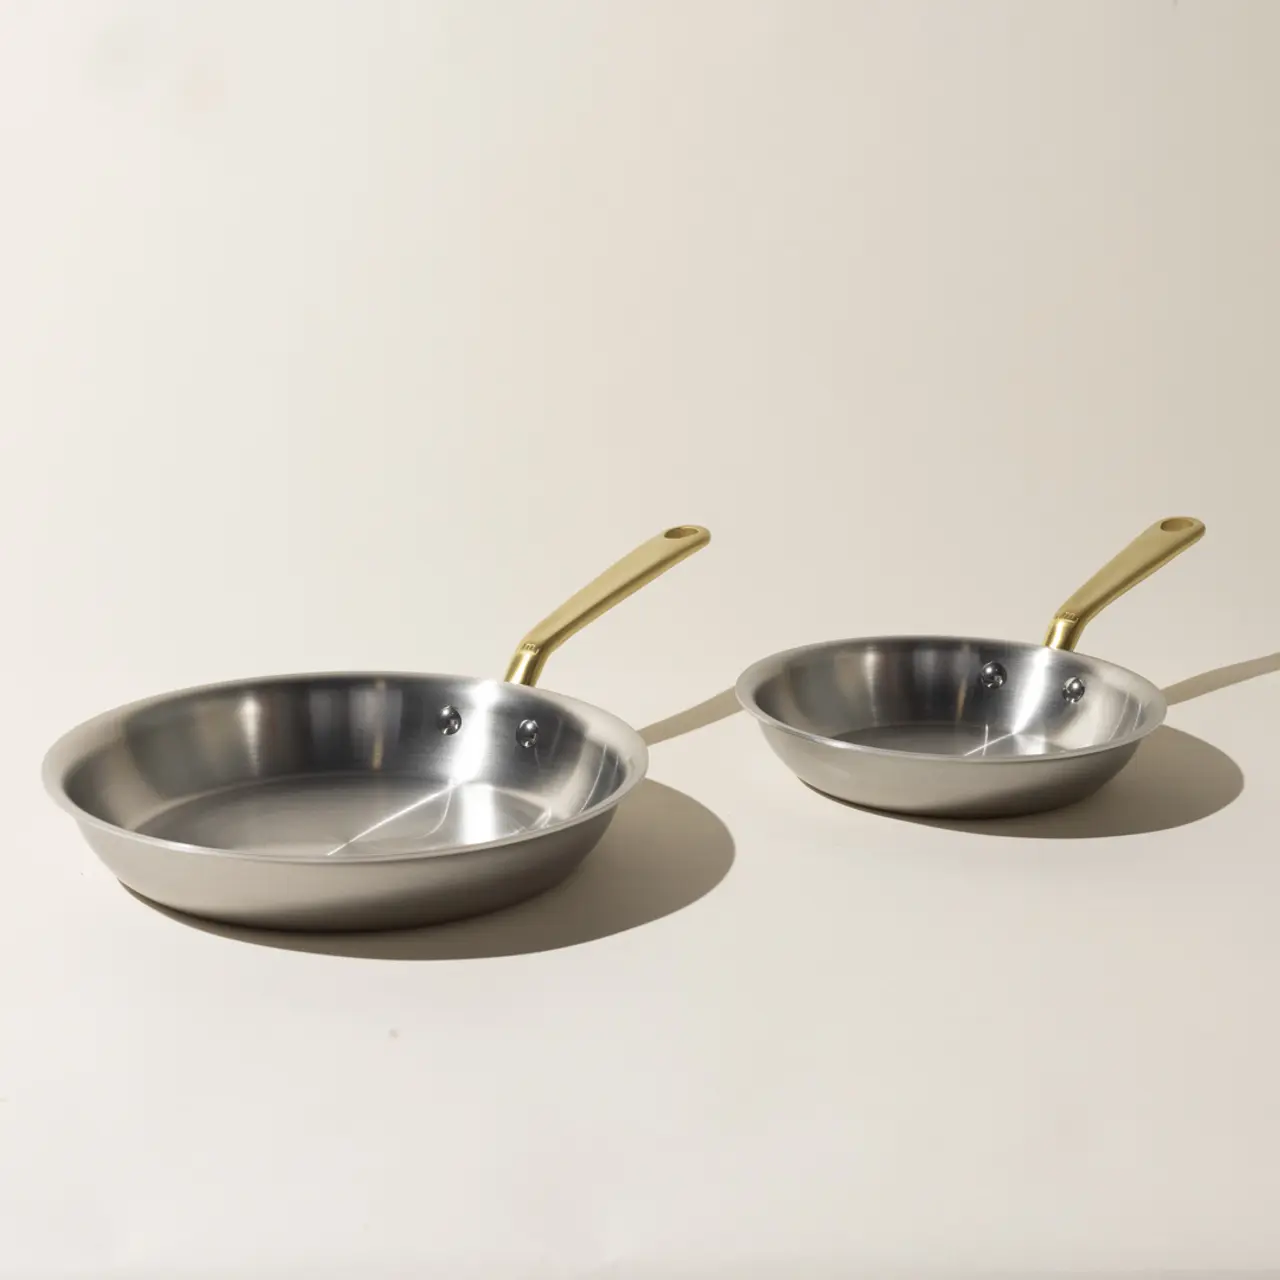 Two stainless steel frying pans with golden handles are placed against a light background.